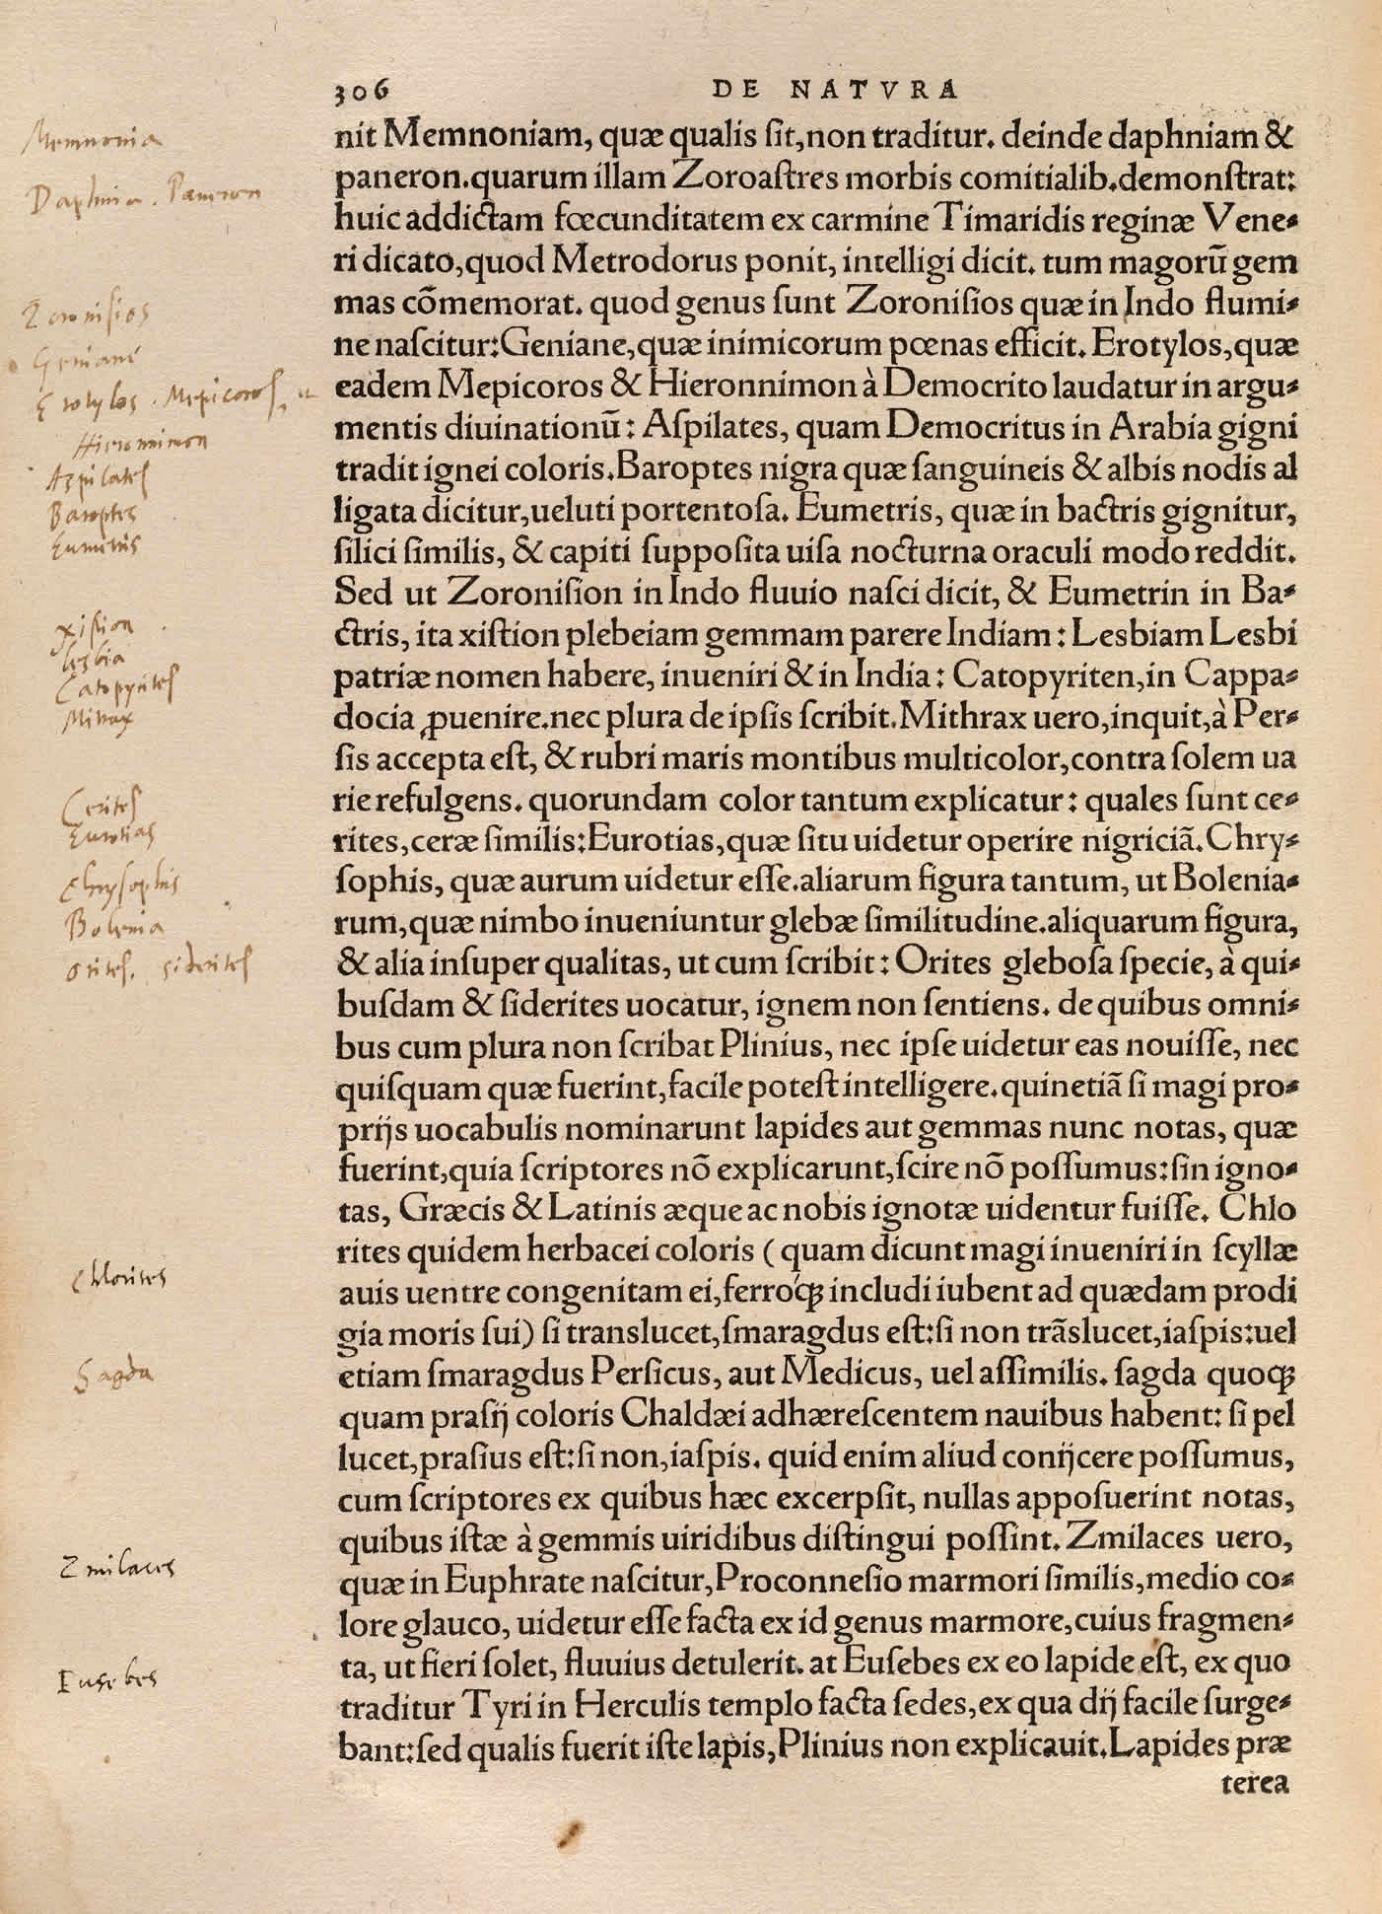 Image 4 from GEORG AGRICOLA (1494 - 1555). De Ortu et Causis Subterraneorum [and other works]. Basel: Hieronymus Frobenius and Nikolaus Episcopius, 1546.